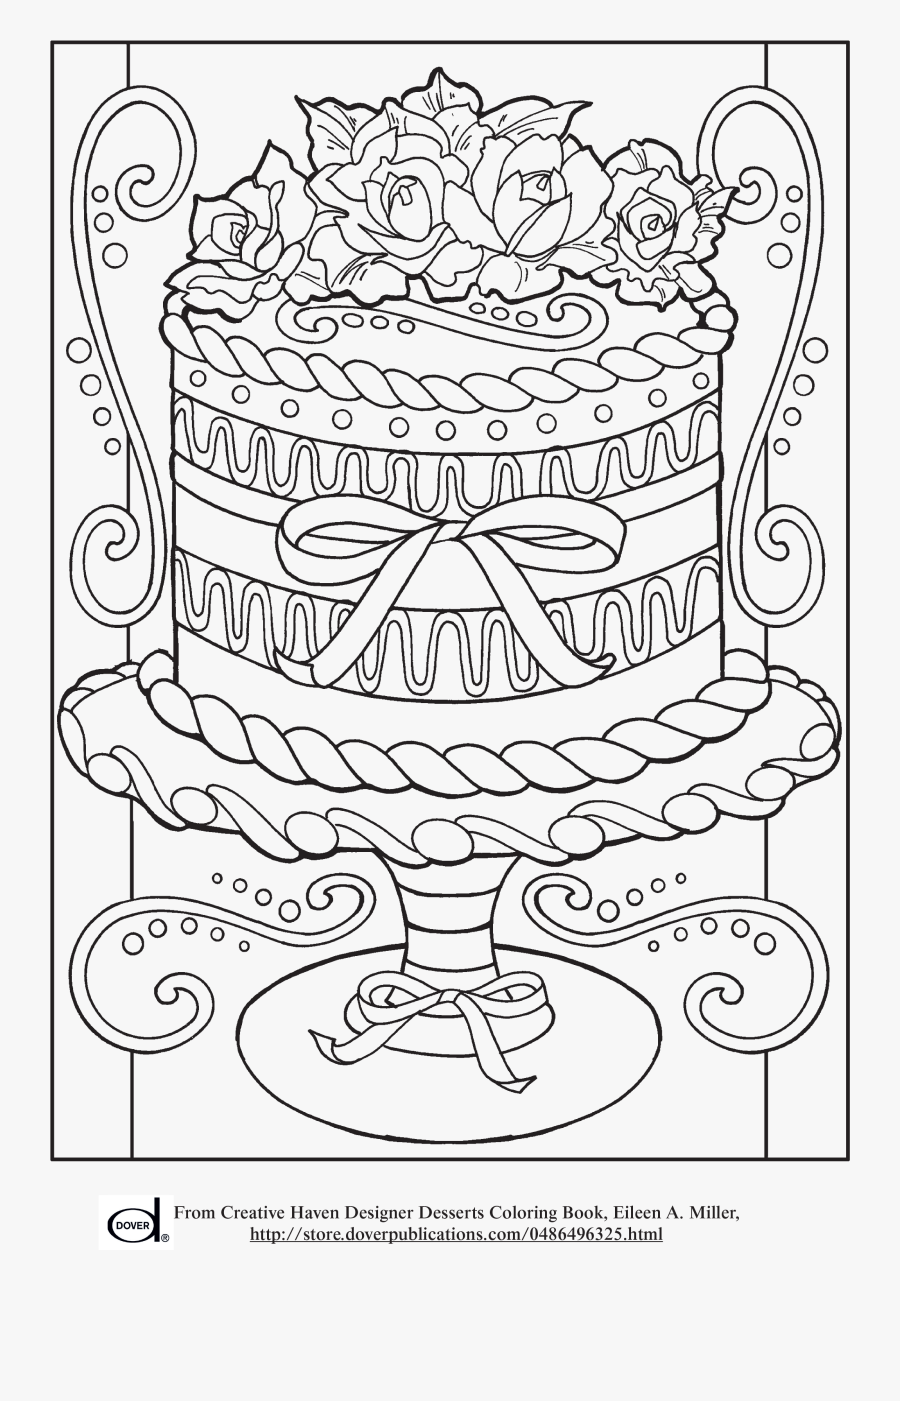 Free Printable Adult Coloring Pages - Cake Coloring Pages For Adults, Transparent Clipart